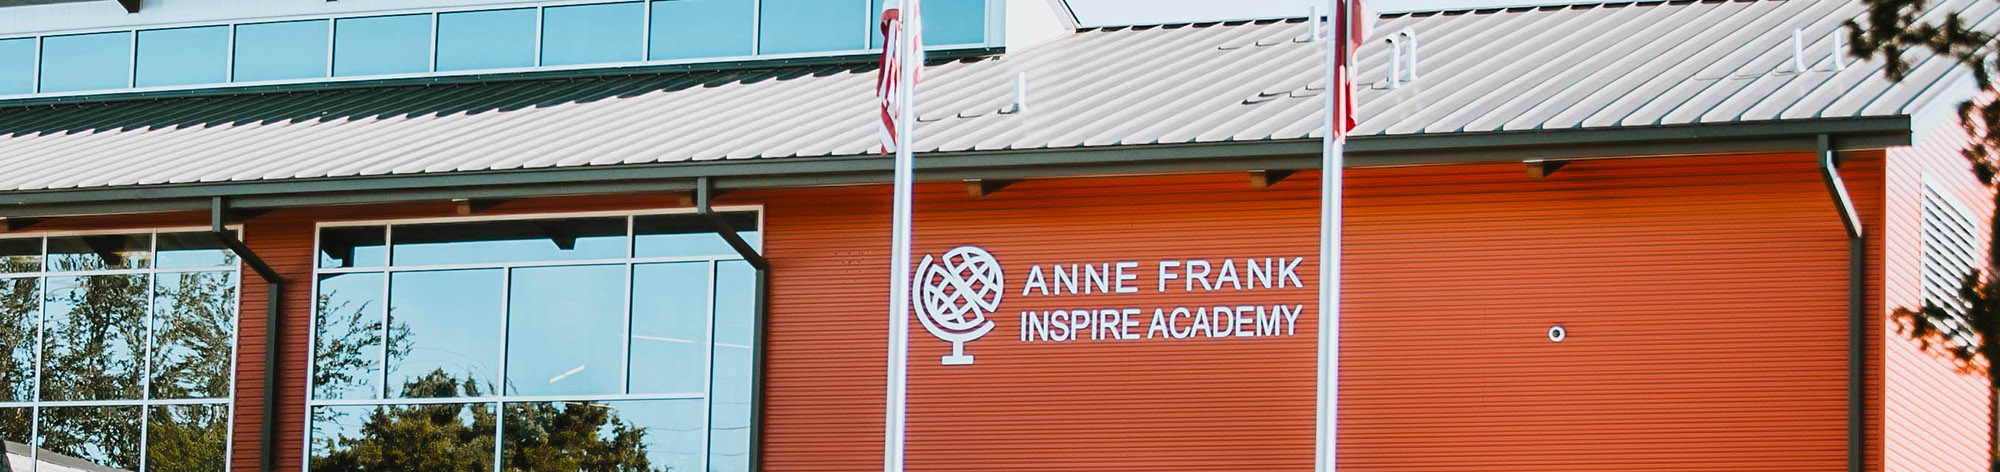 Outside view of Anne Frank IA school building